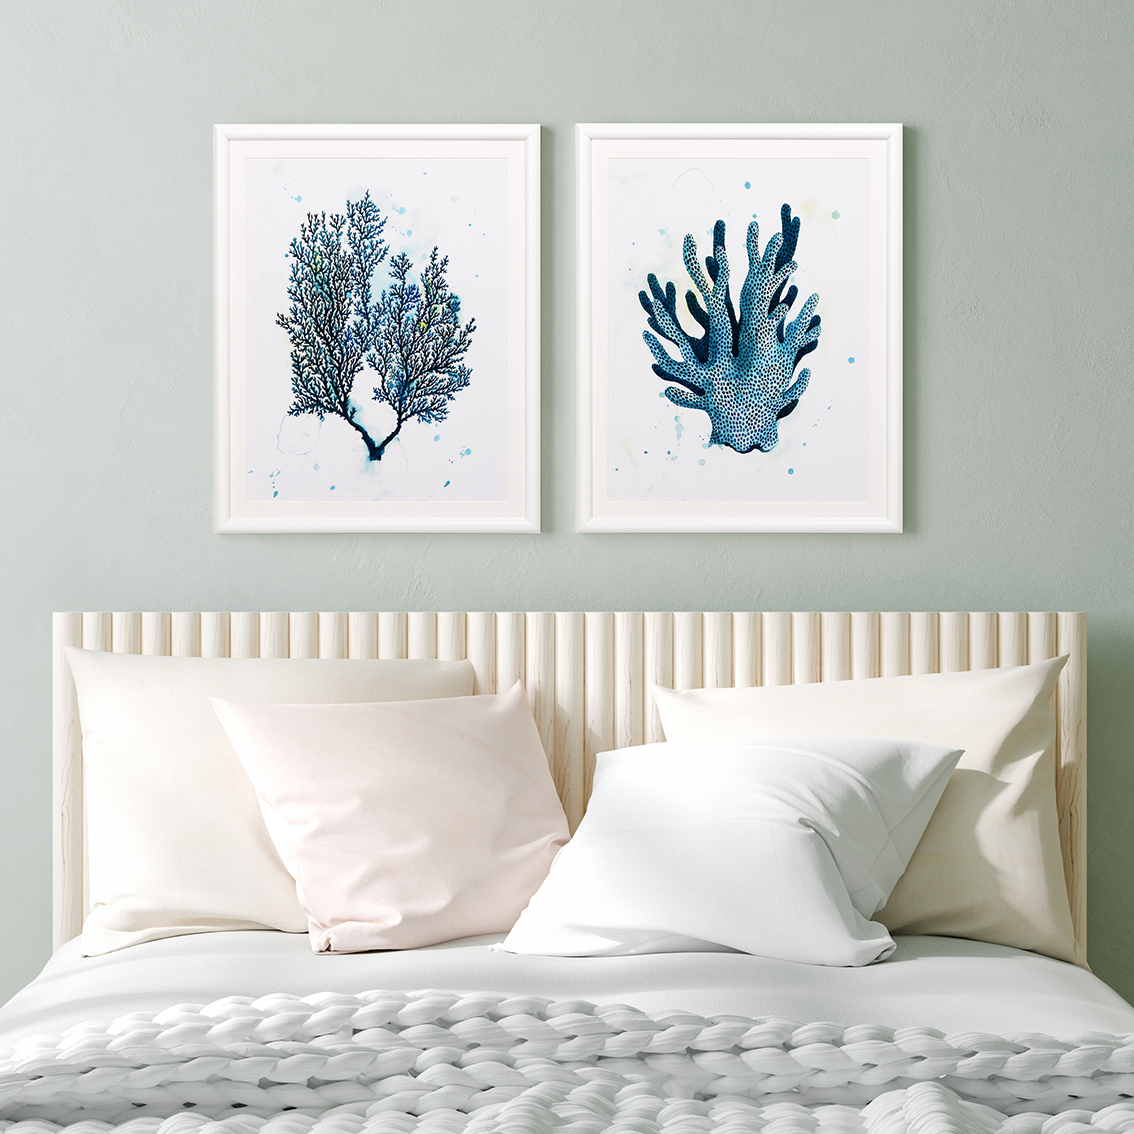 Framed Watercolor Blue Marine Plants Wall Art Featured Image